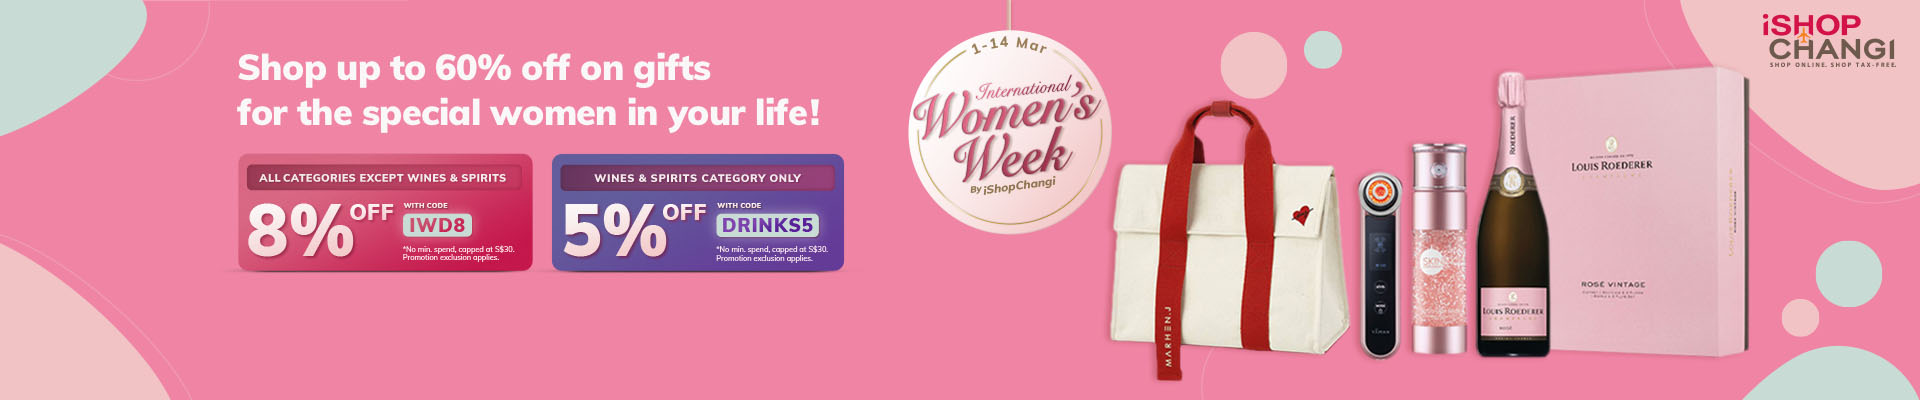 make this international womens week unforgettable with ishopchangis exclusive discounts and promotions